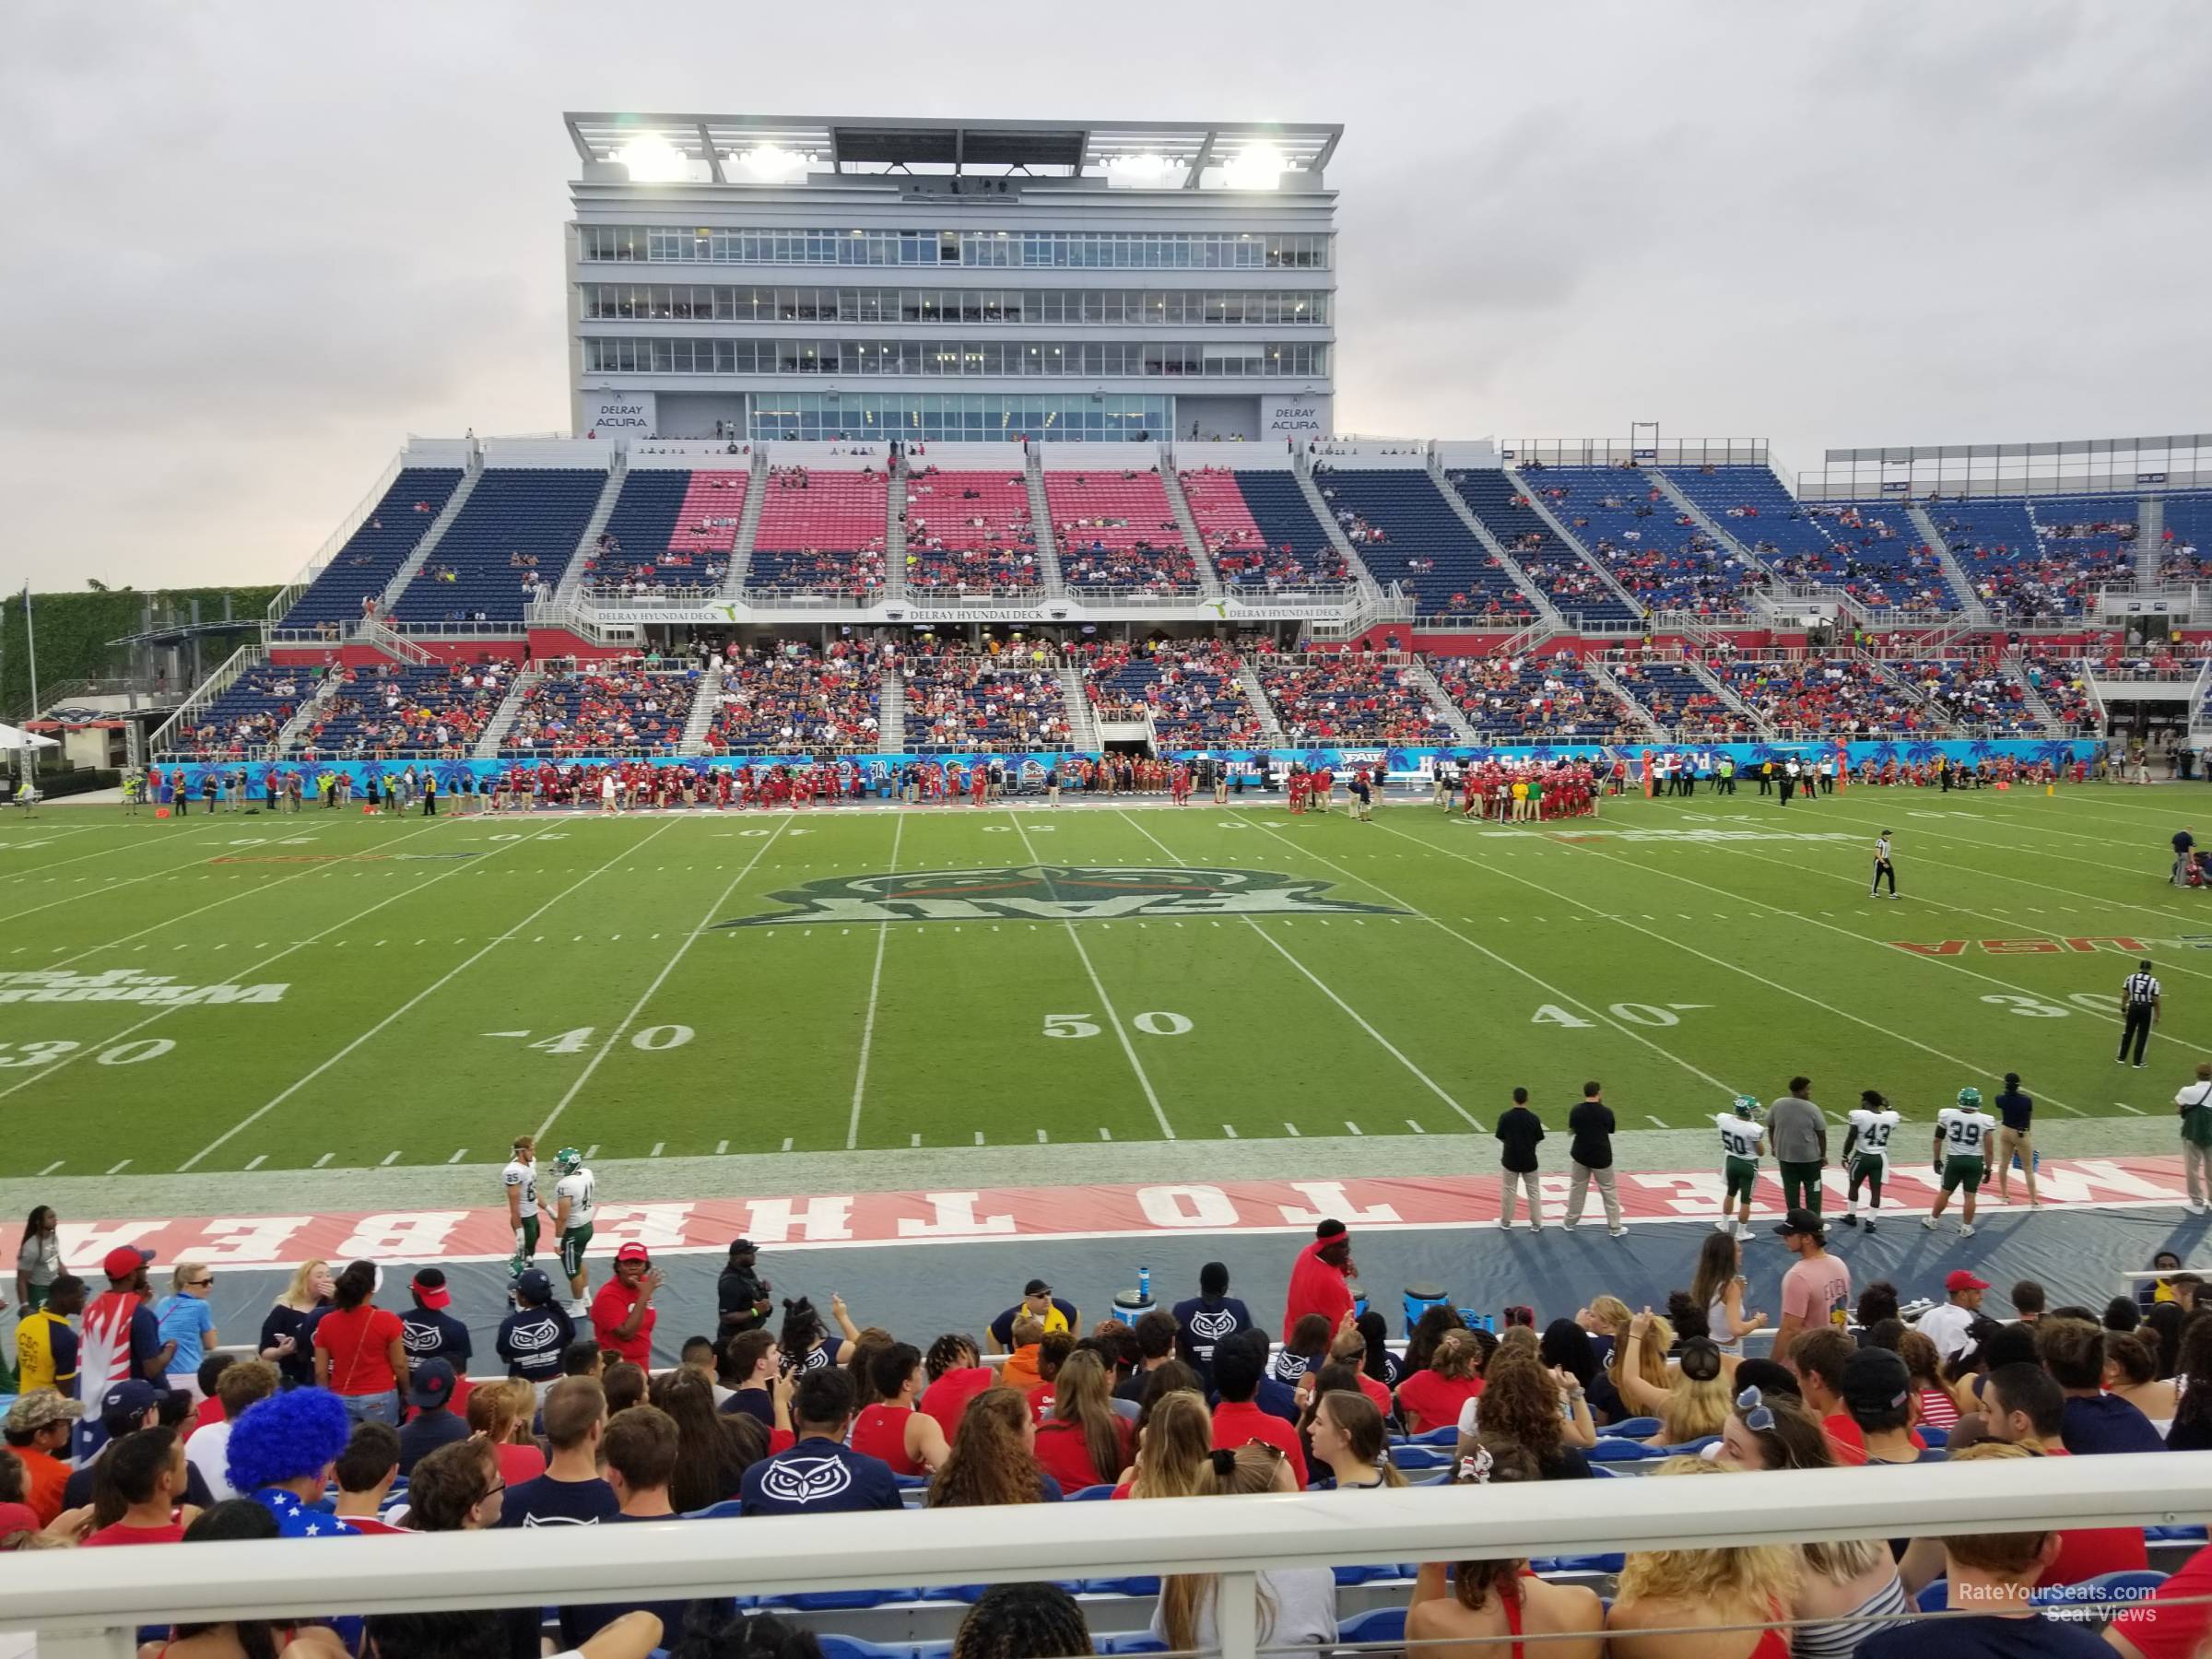 Section 127 at FAU Stadium